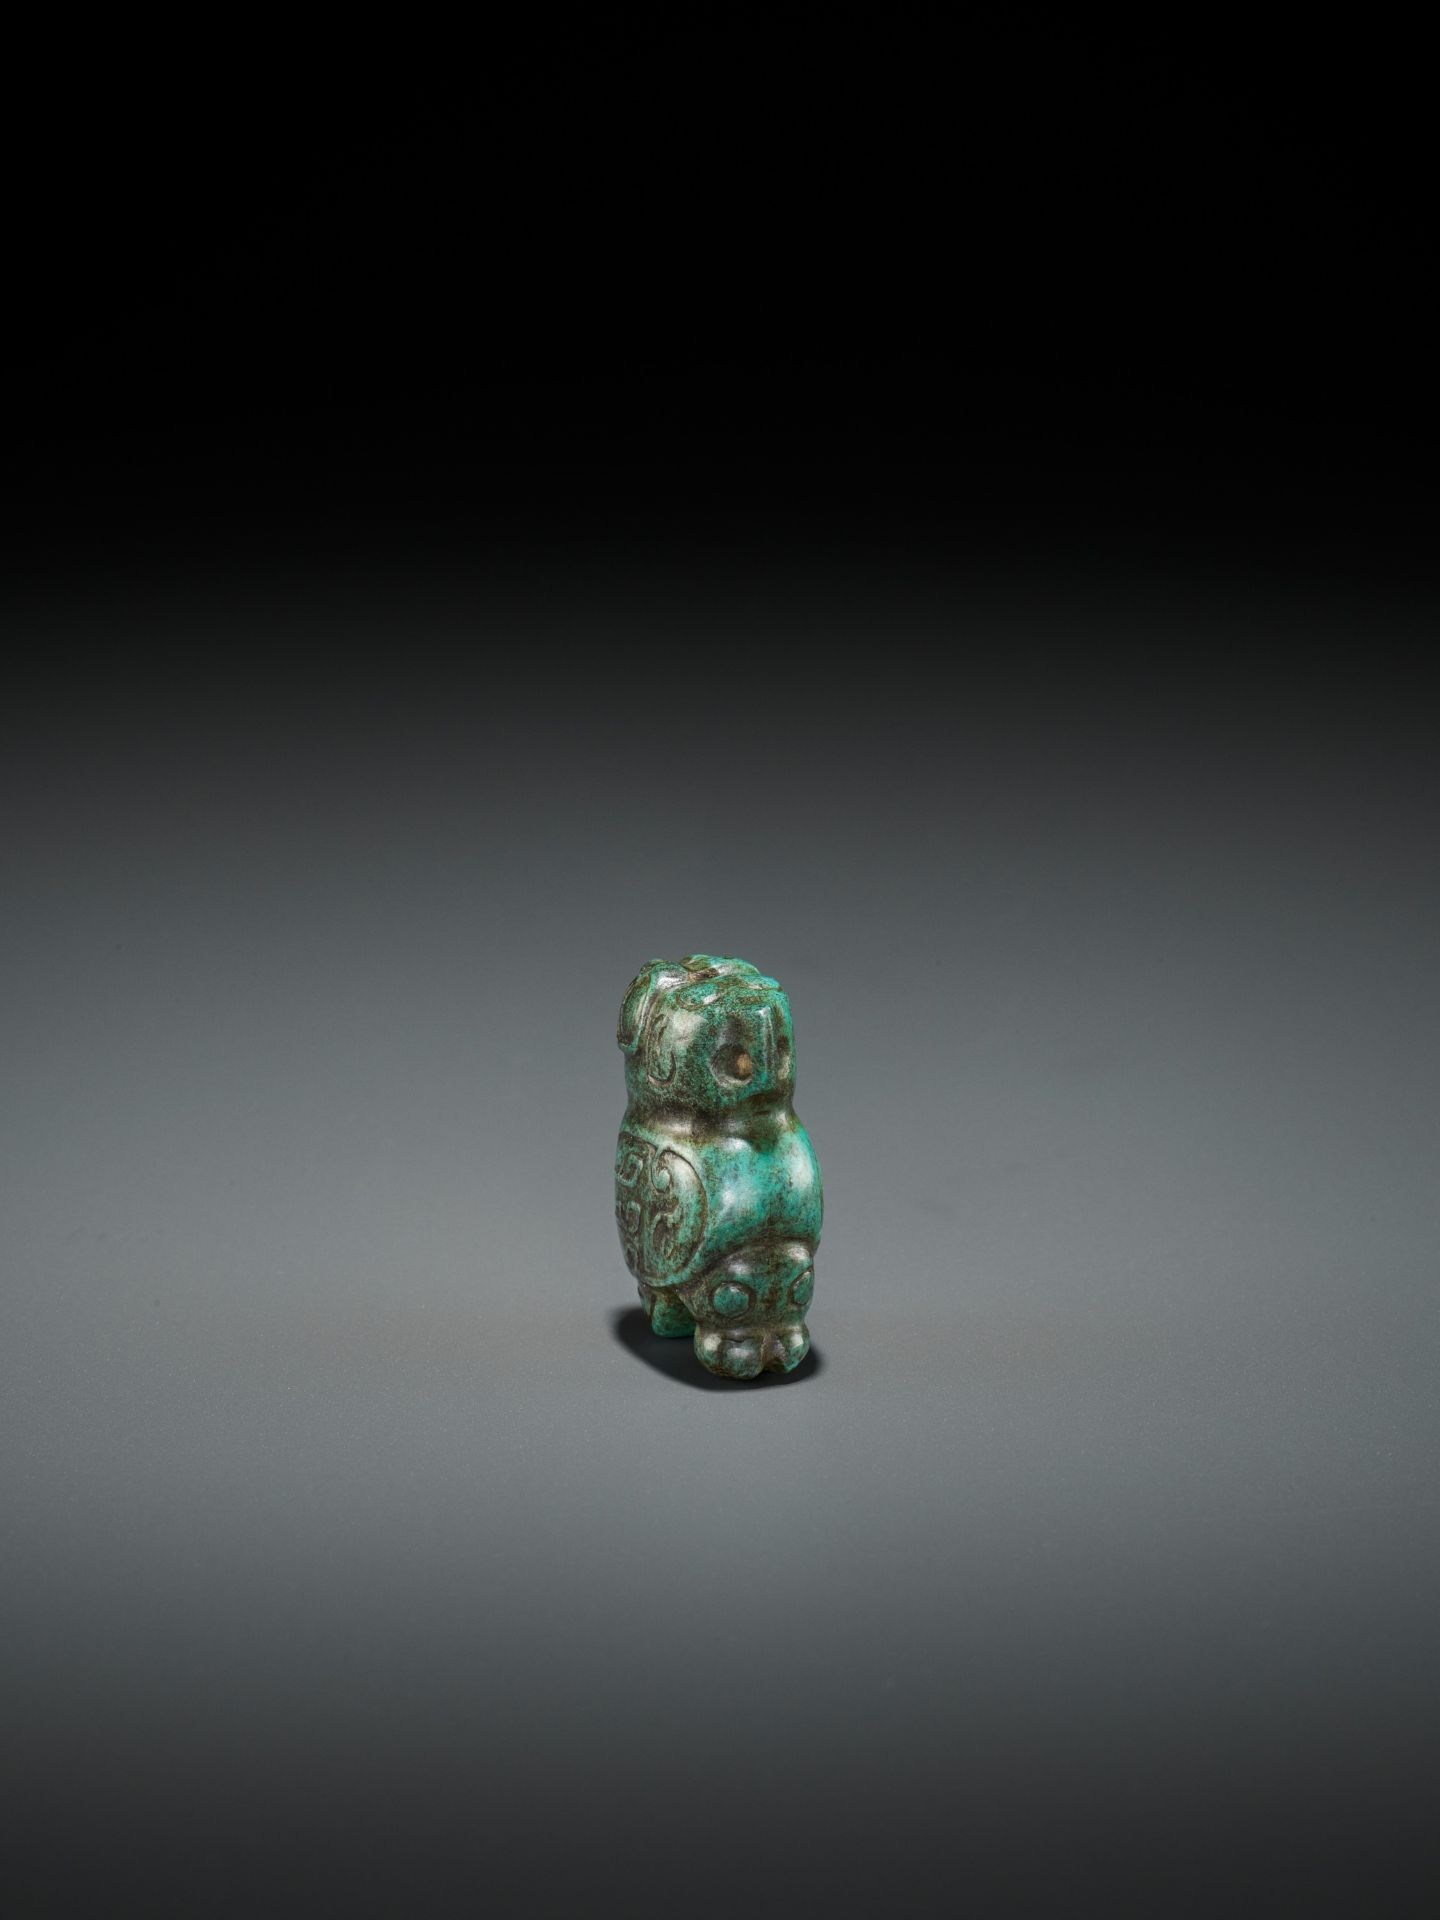 A TURQUOISE MATRIX PENDANT DEPICTING AN OWL, LATE SHANG DYNASTY - Image 9 of 13